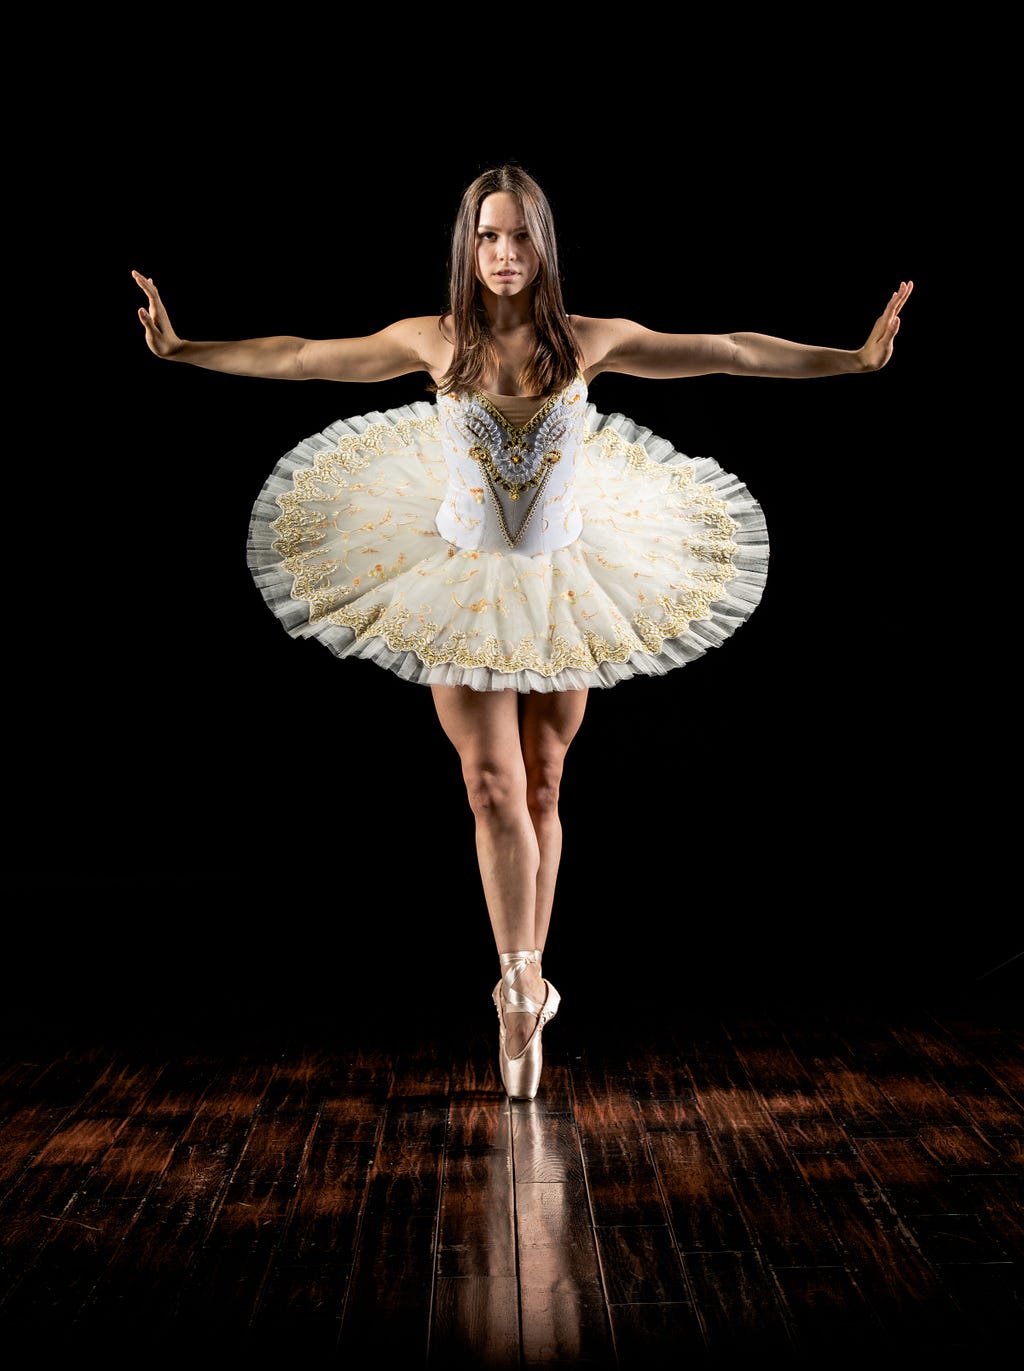 Photo by David Hofmann on Unsplash — Ballerina poses on her toes and with her arms out